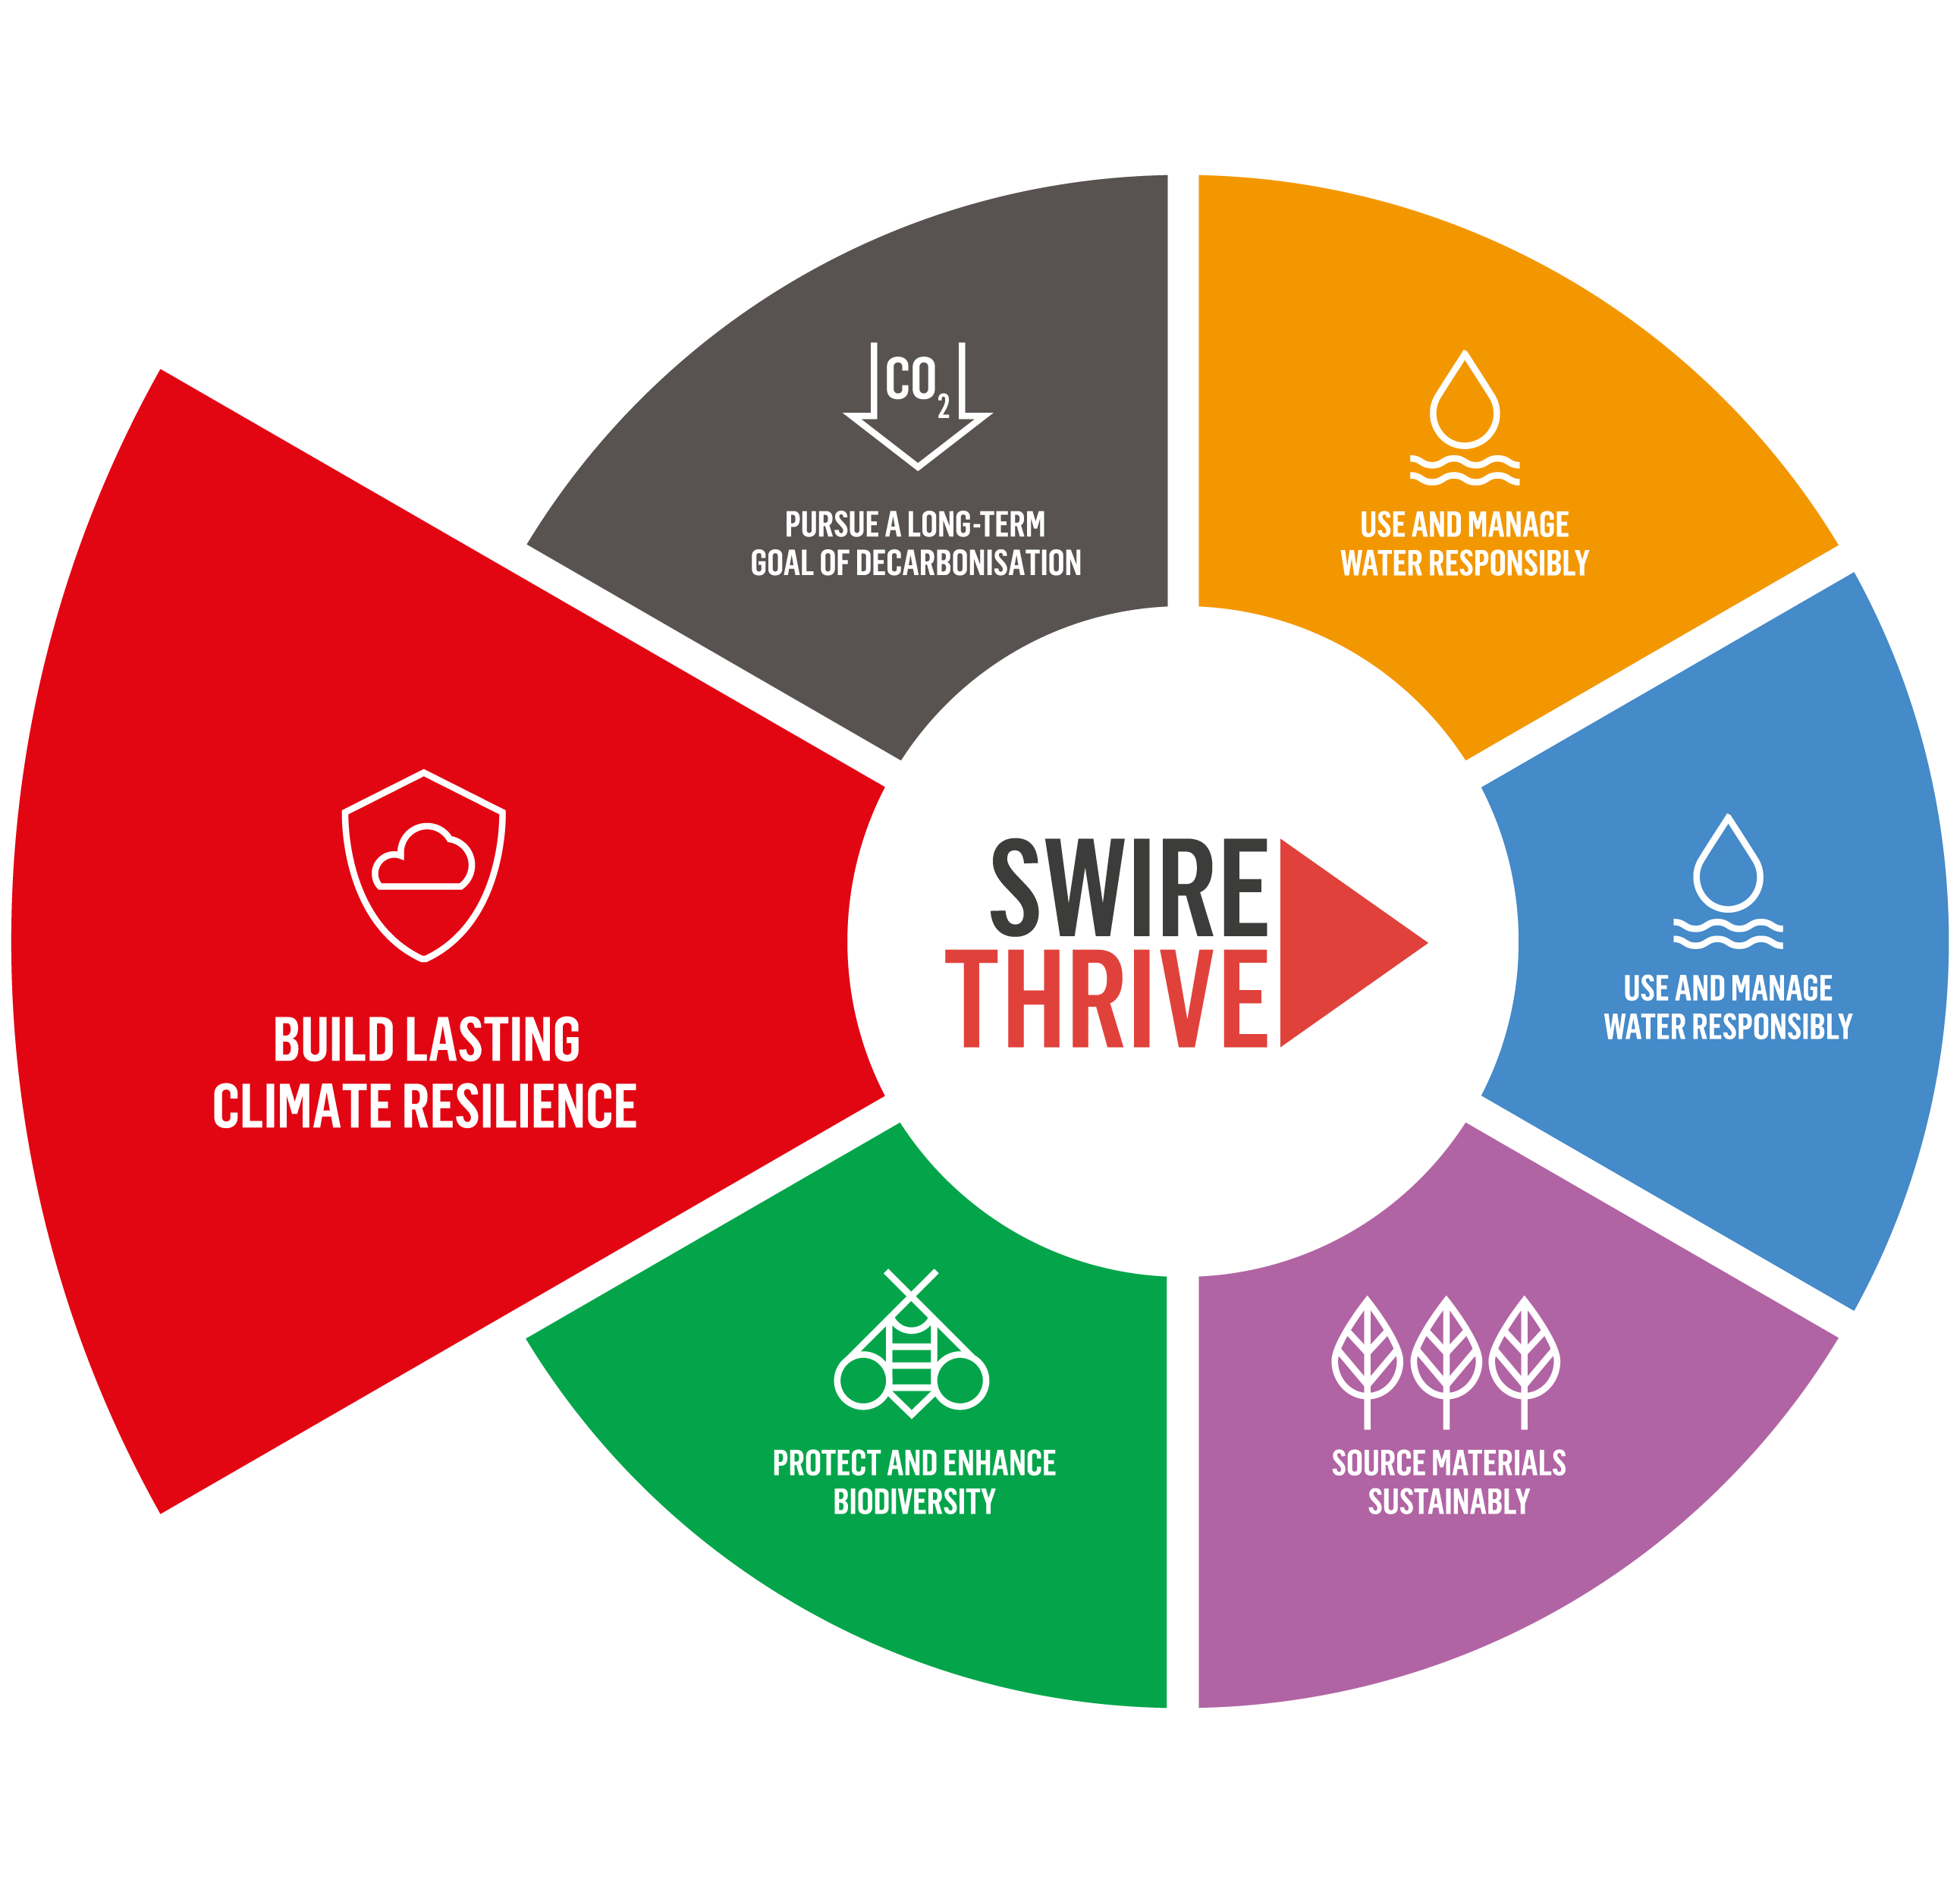 SWIRE THRIVE - Build lasting climate resilience